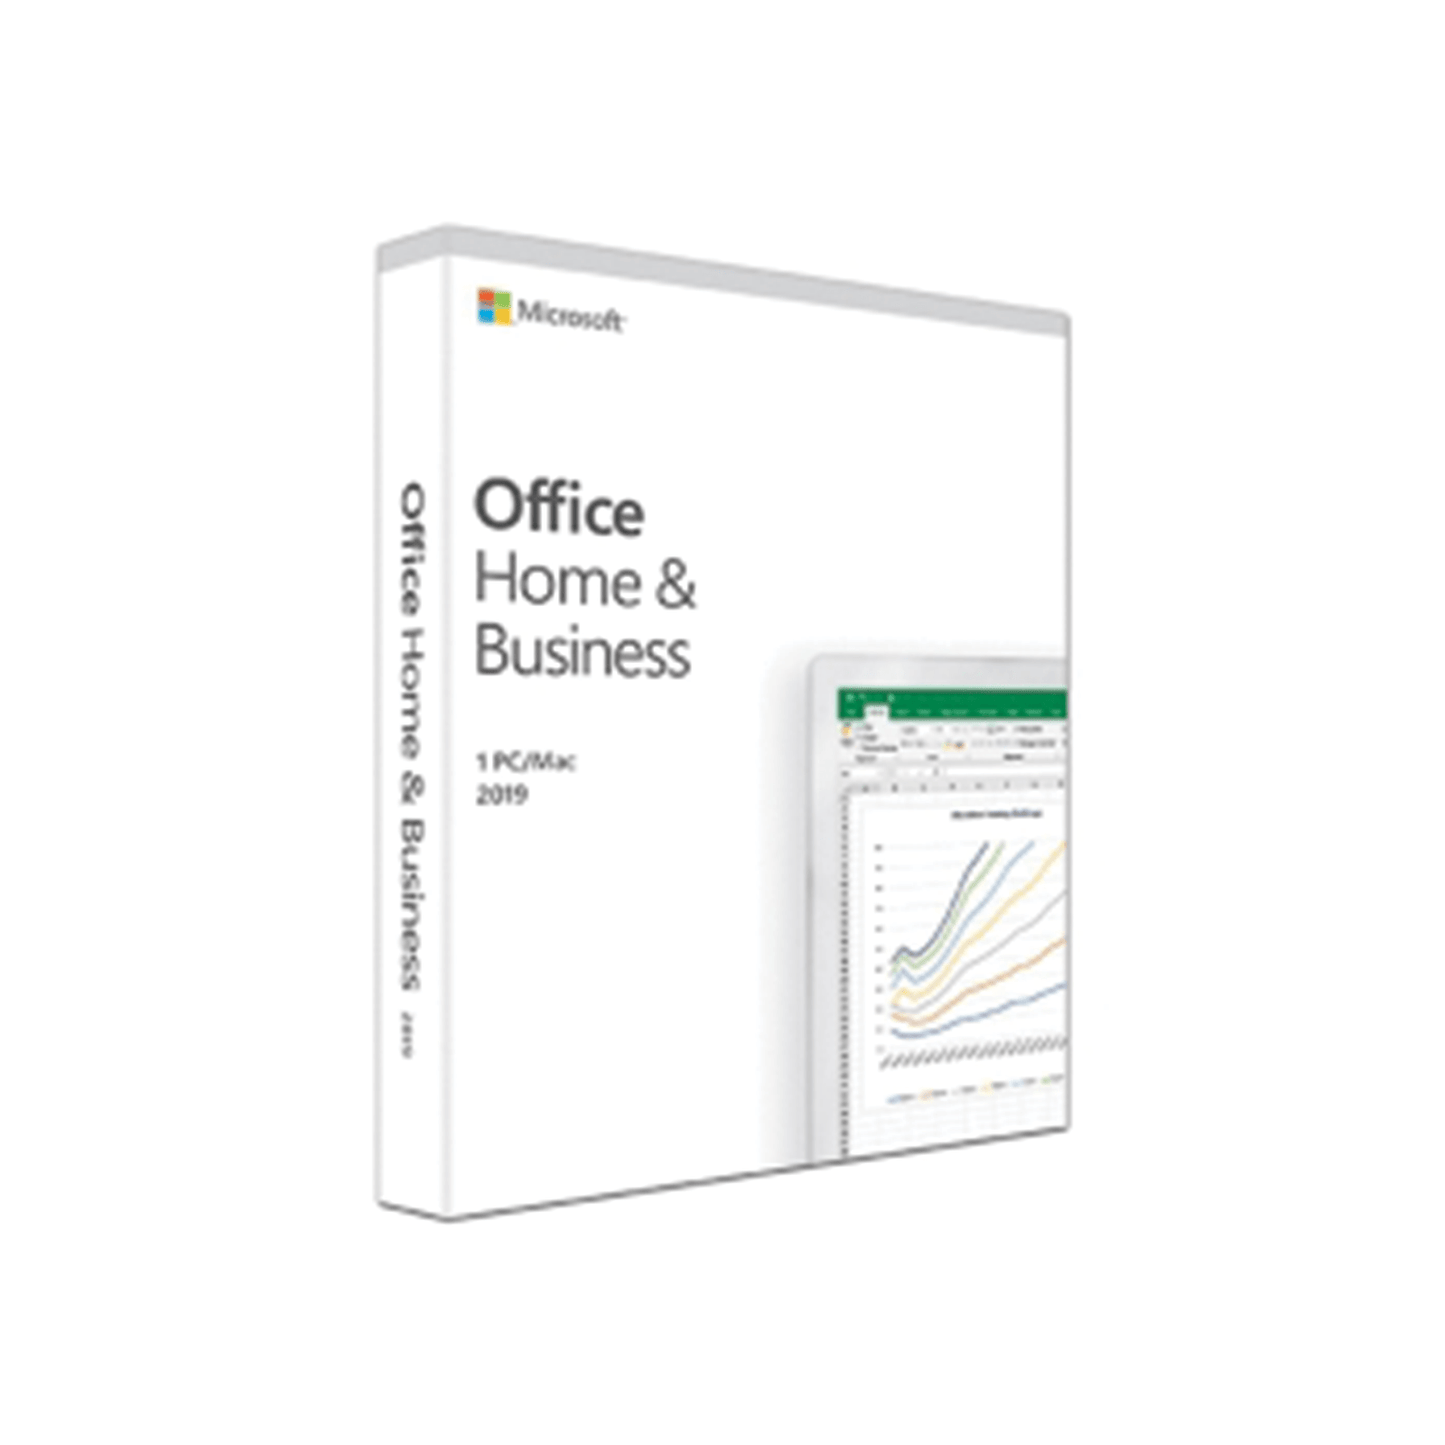 OFFICE HOME & BUSINESS 2019 ENGLISH MDLS P6